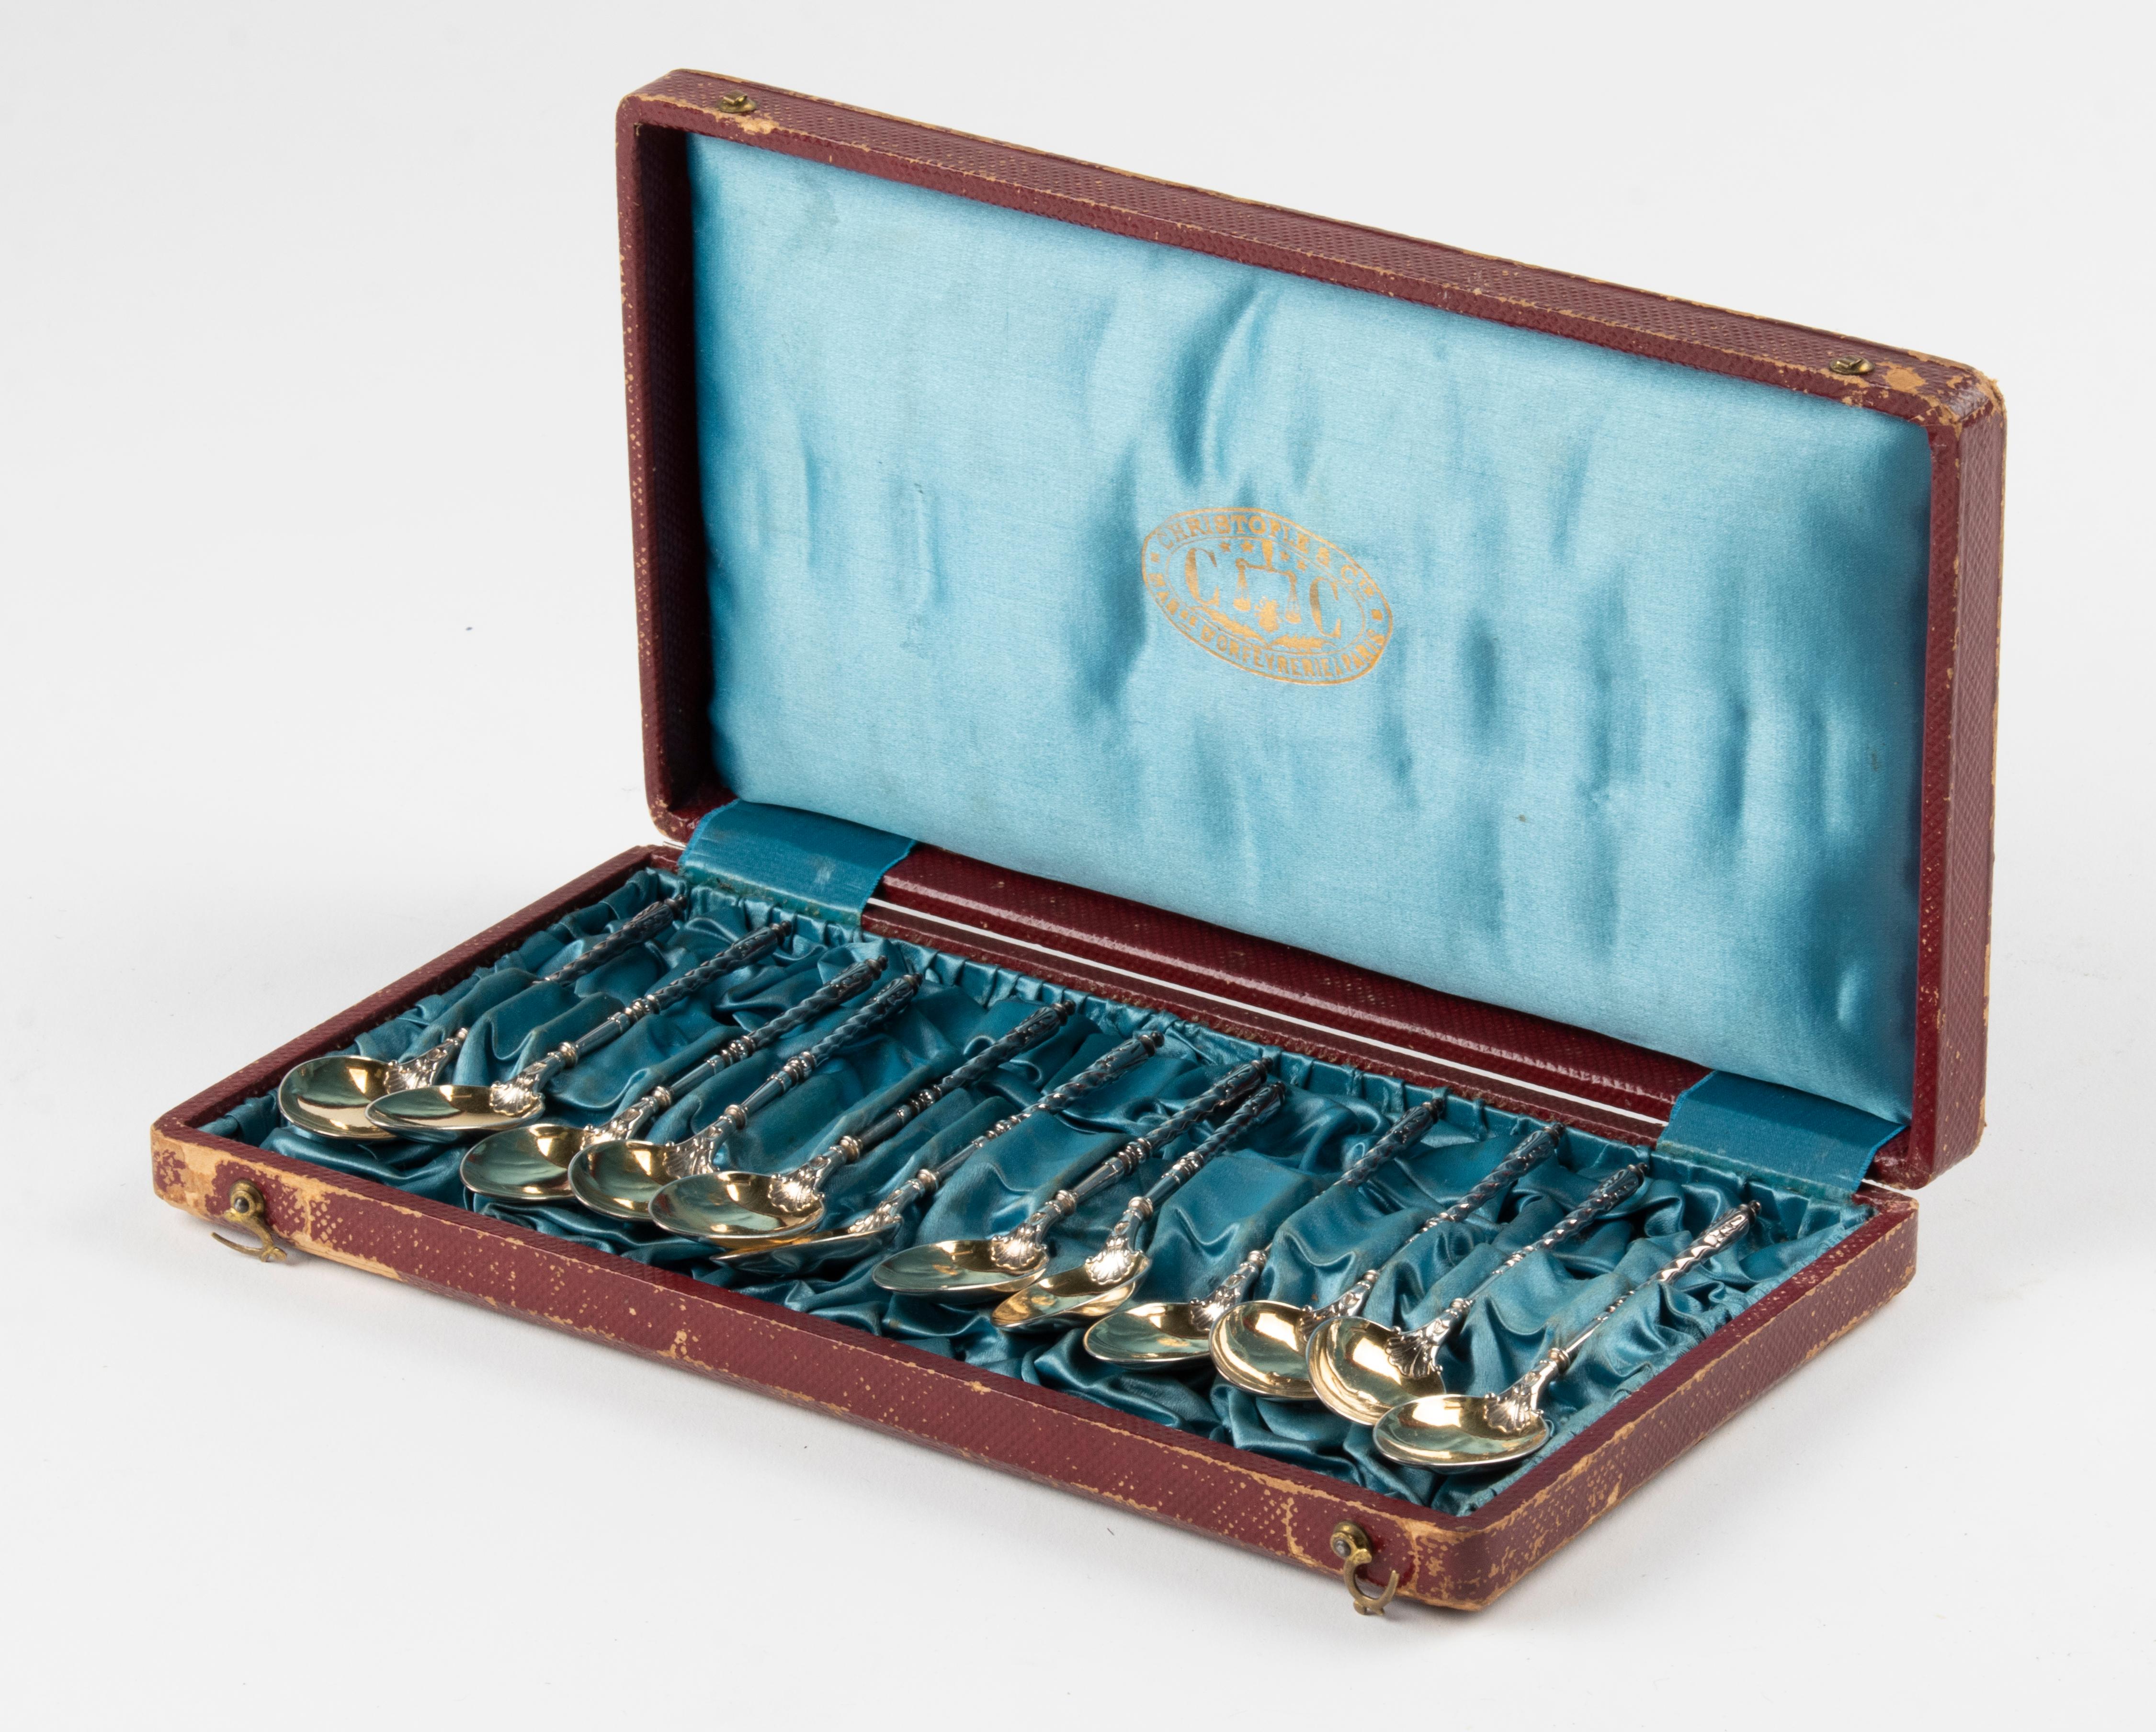 Lovely set of 12 antique silver plated teaspoons by the French maker Christofle. The spoons date from around 1900. They are beautifully refined, the scoop part is gilded.
The spoons come in an original Christofle case. This case has clear signs of